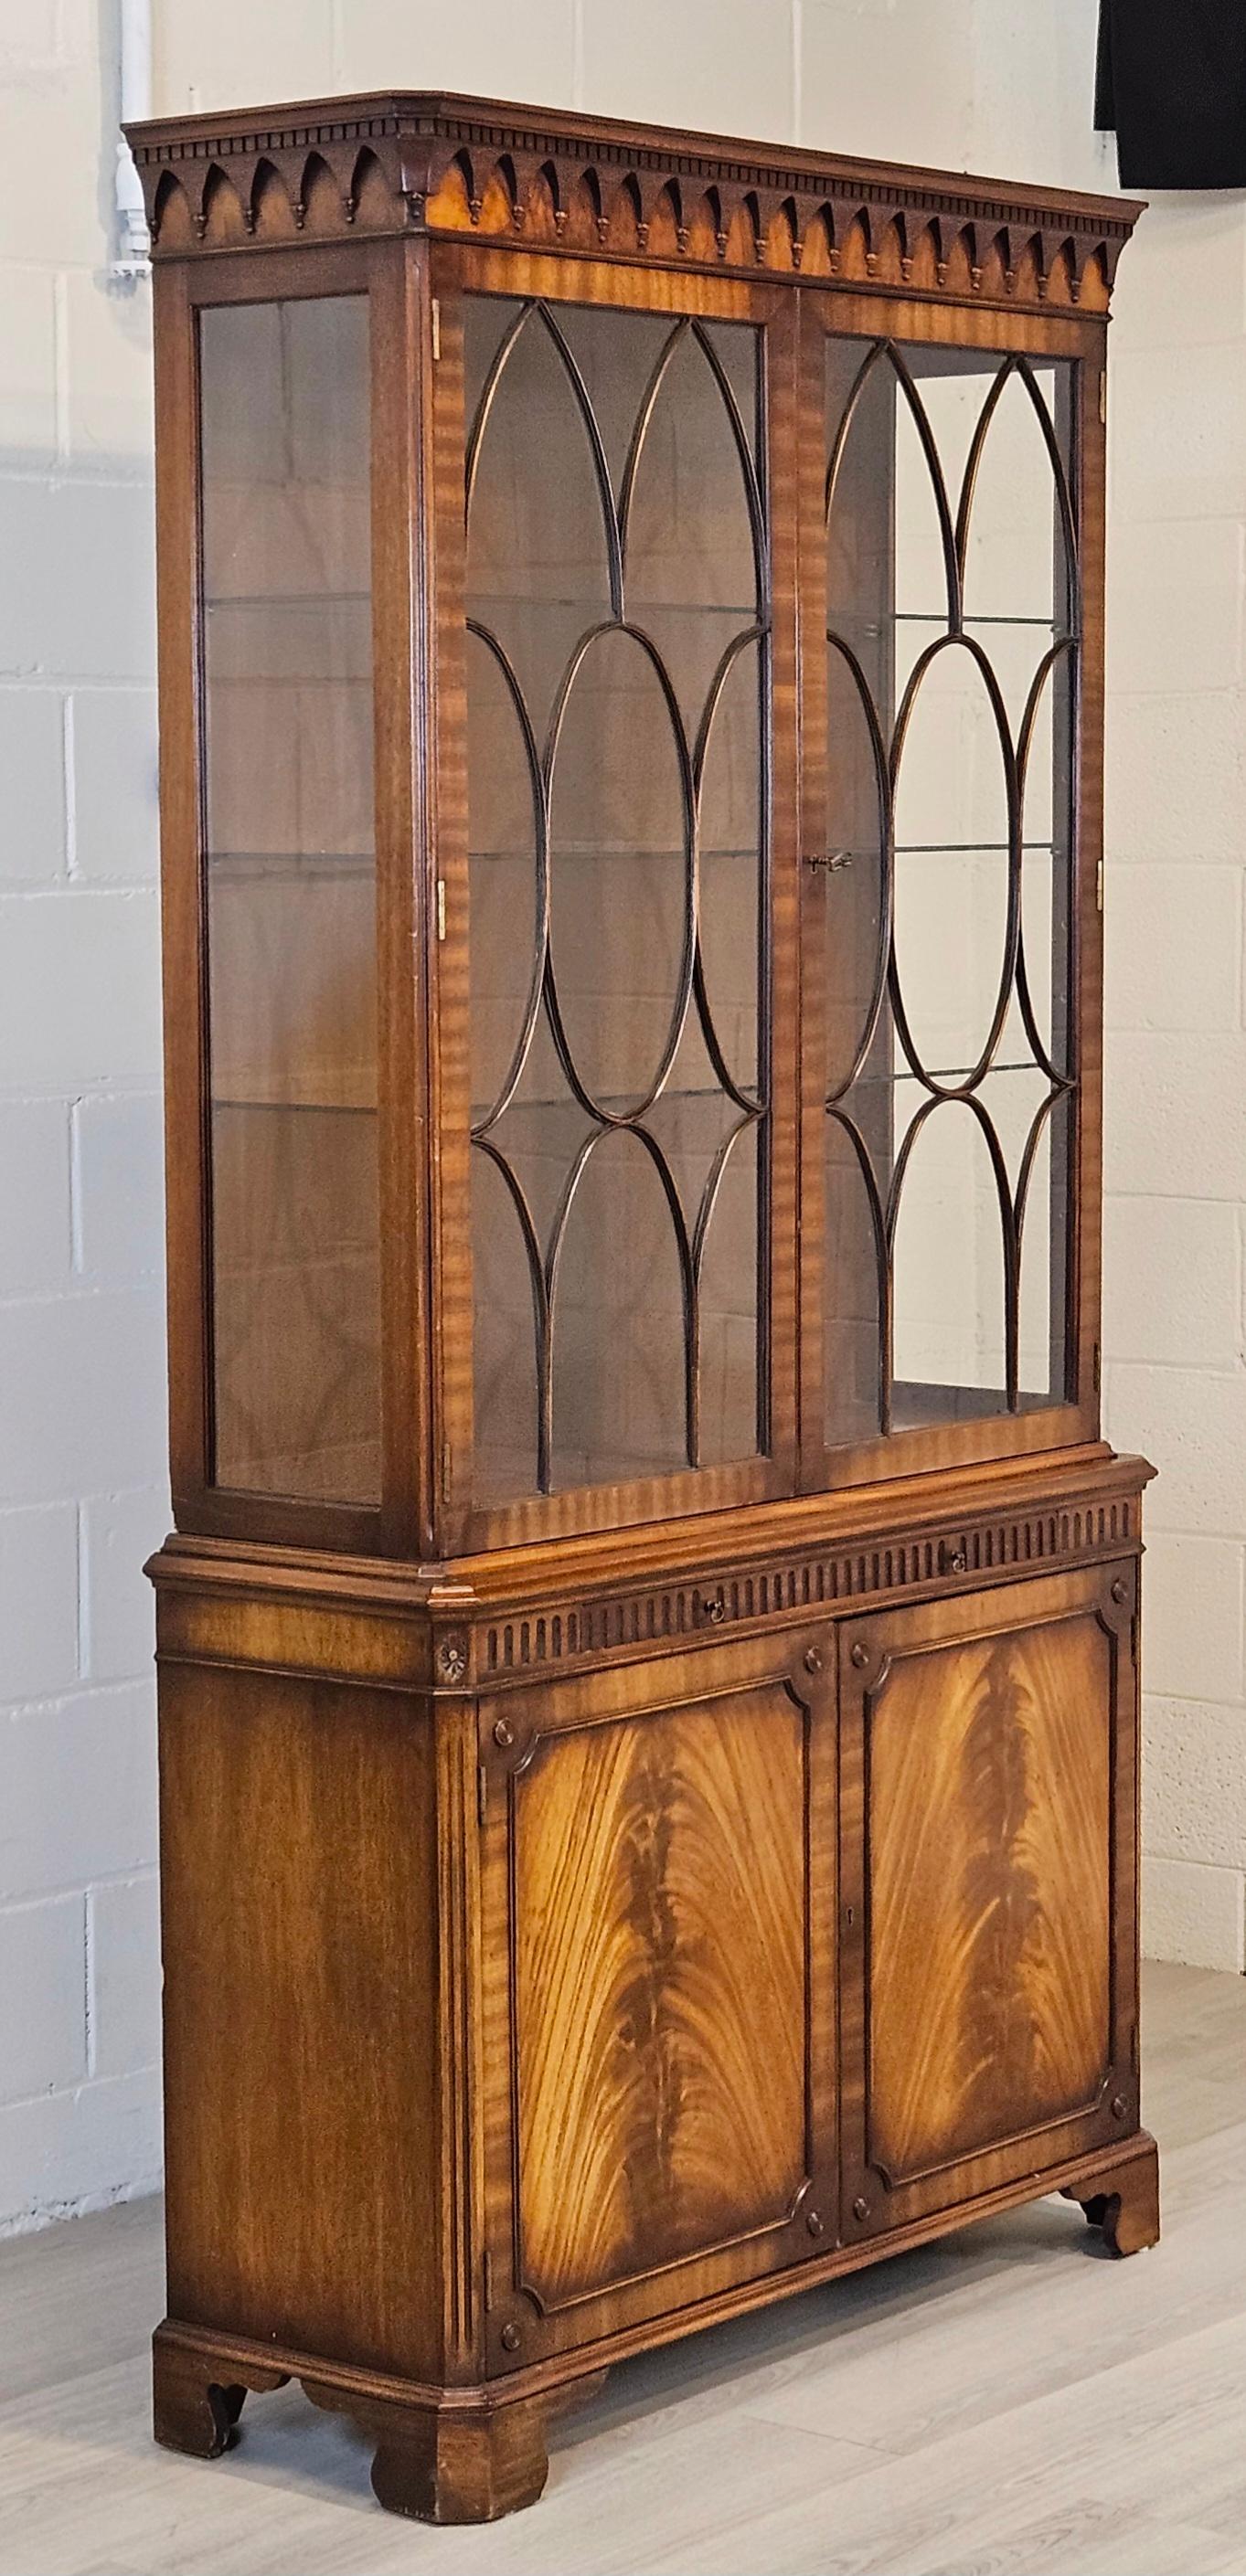 A wonderful Traditional English Display Bookcase in Georgian Style crafted in Mahogany.  The cabinet has two doors framed in mahogany with individual hand cut astragal glazed glass panel and glass side panels and adjustable glass shelved. 
The way